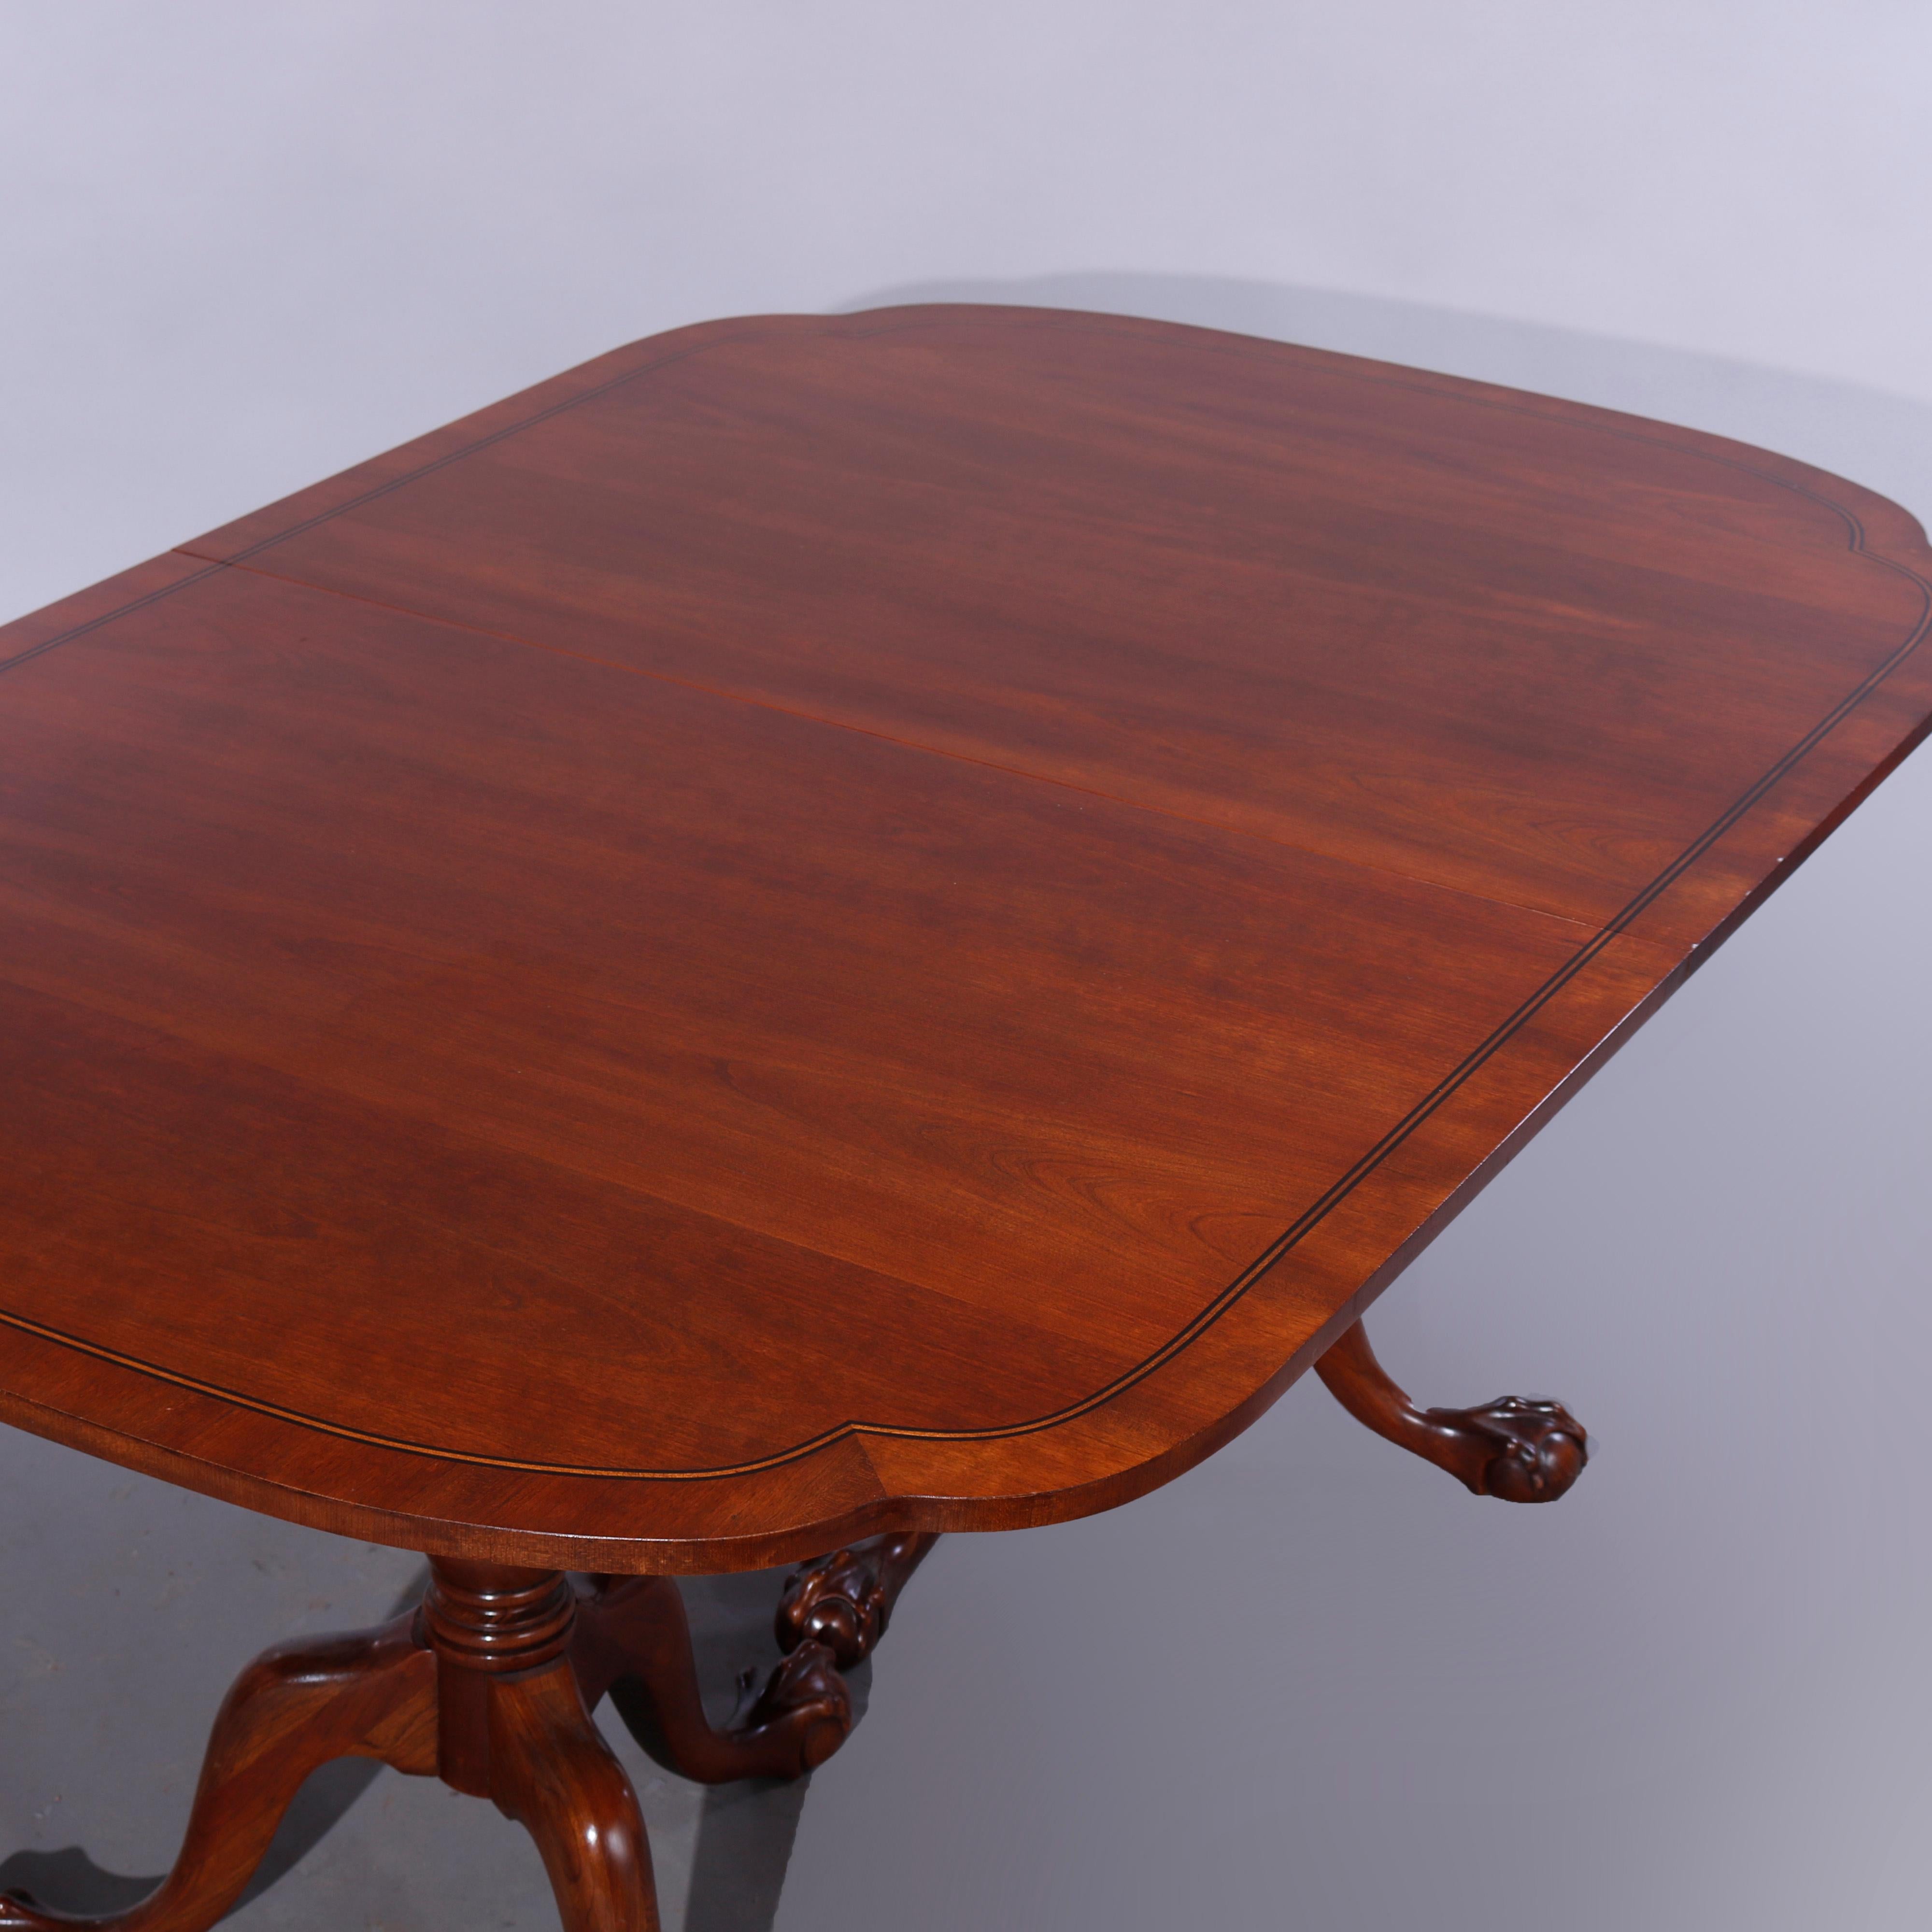 Carved Antique Mahogany Chippendale Style Claw Foot Dining Table & Three Leaves c1930